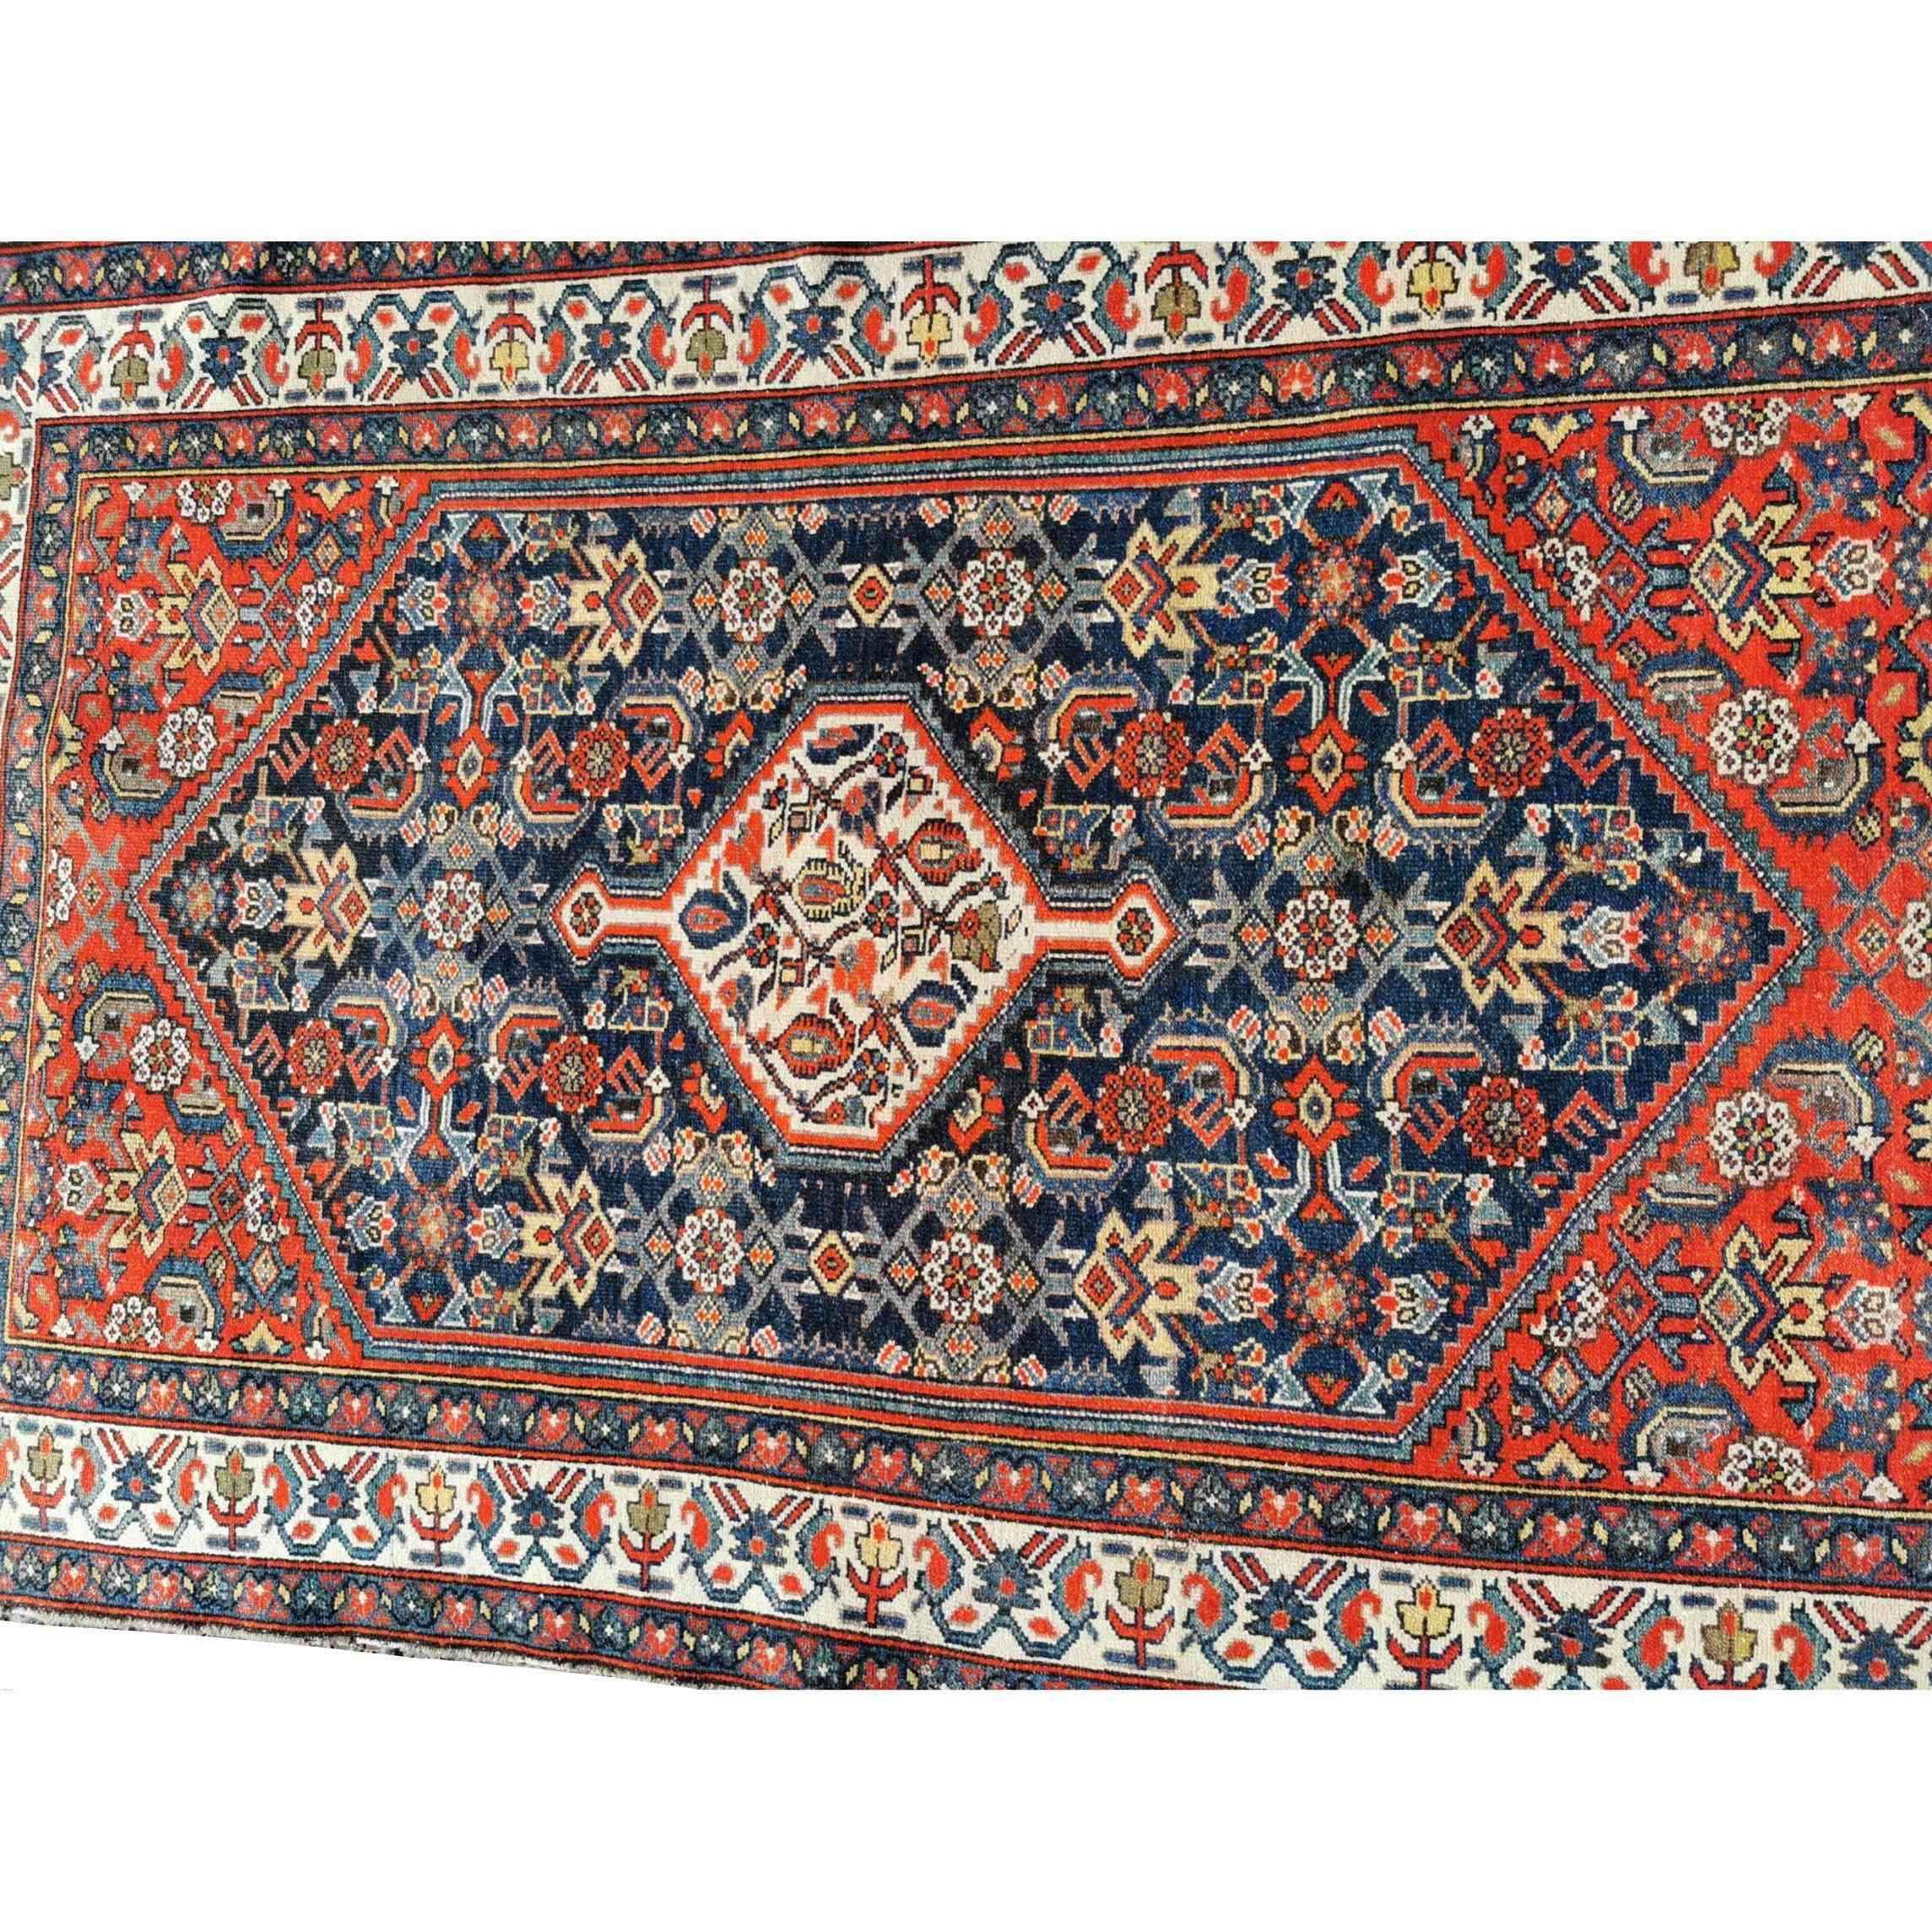 191 x 130 cm Old Persian Malayer Traditional Brown Rug - Rugmaster